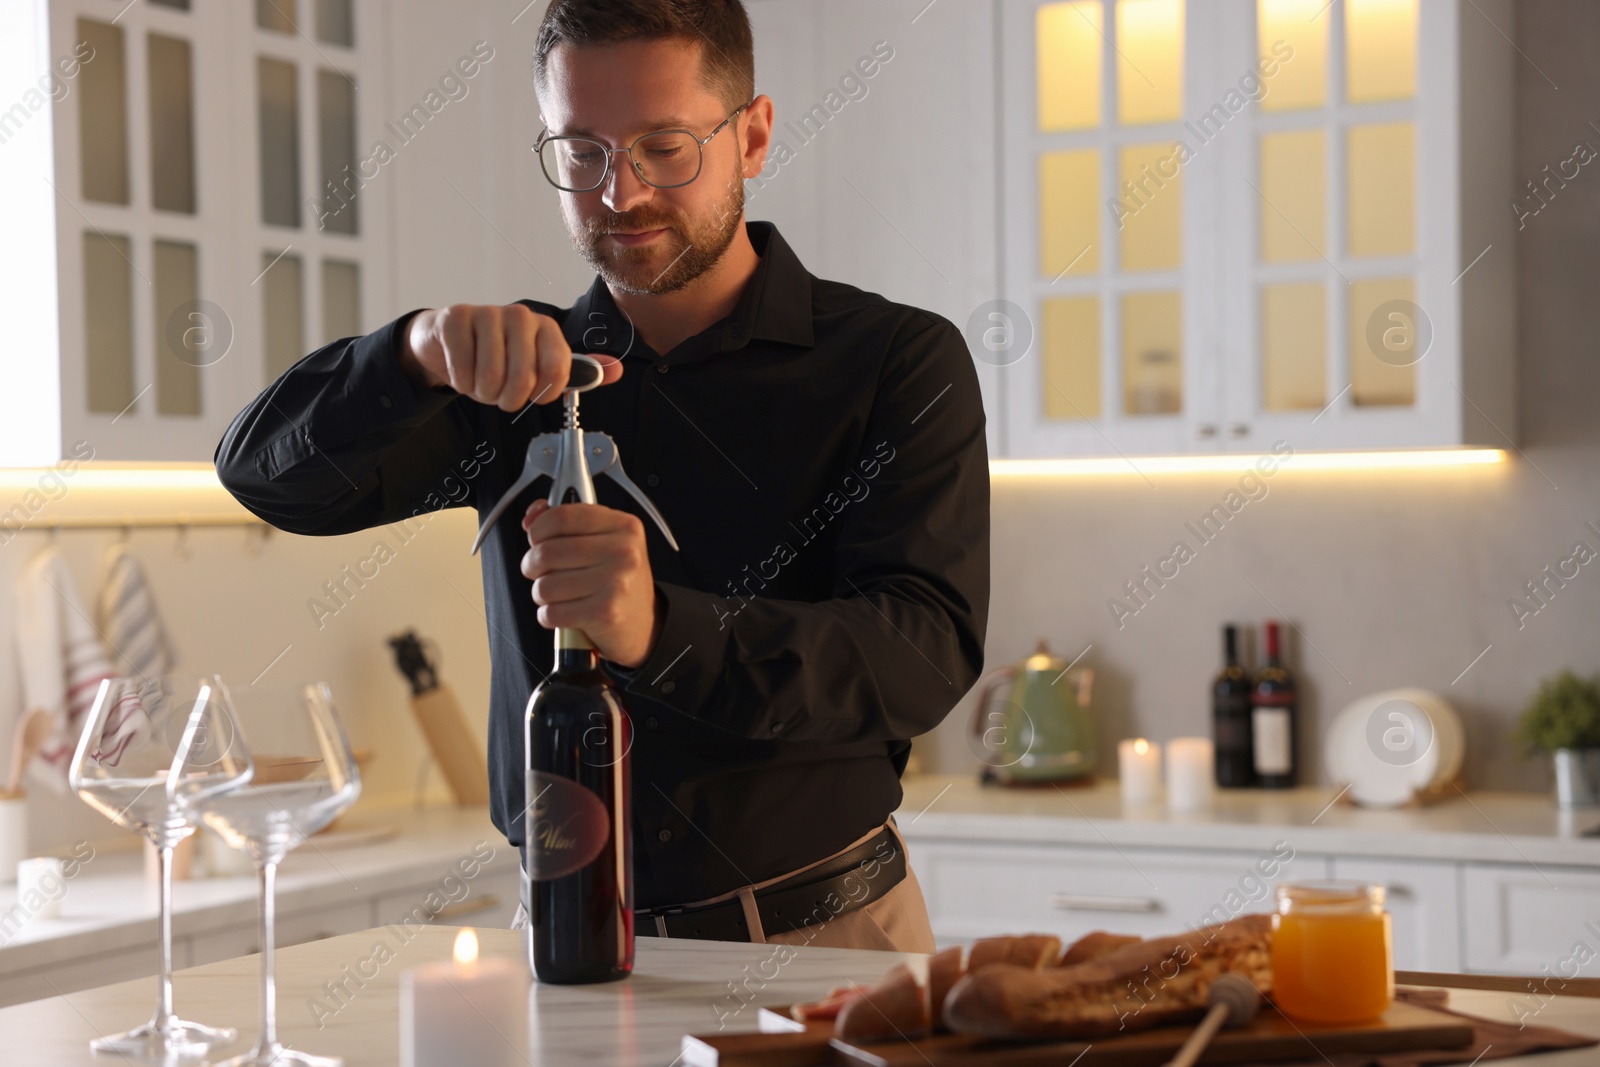 Photo of Romantic dinner. Man opening wine bottle with corkscrew at table in kitchen